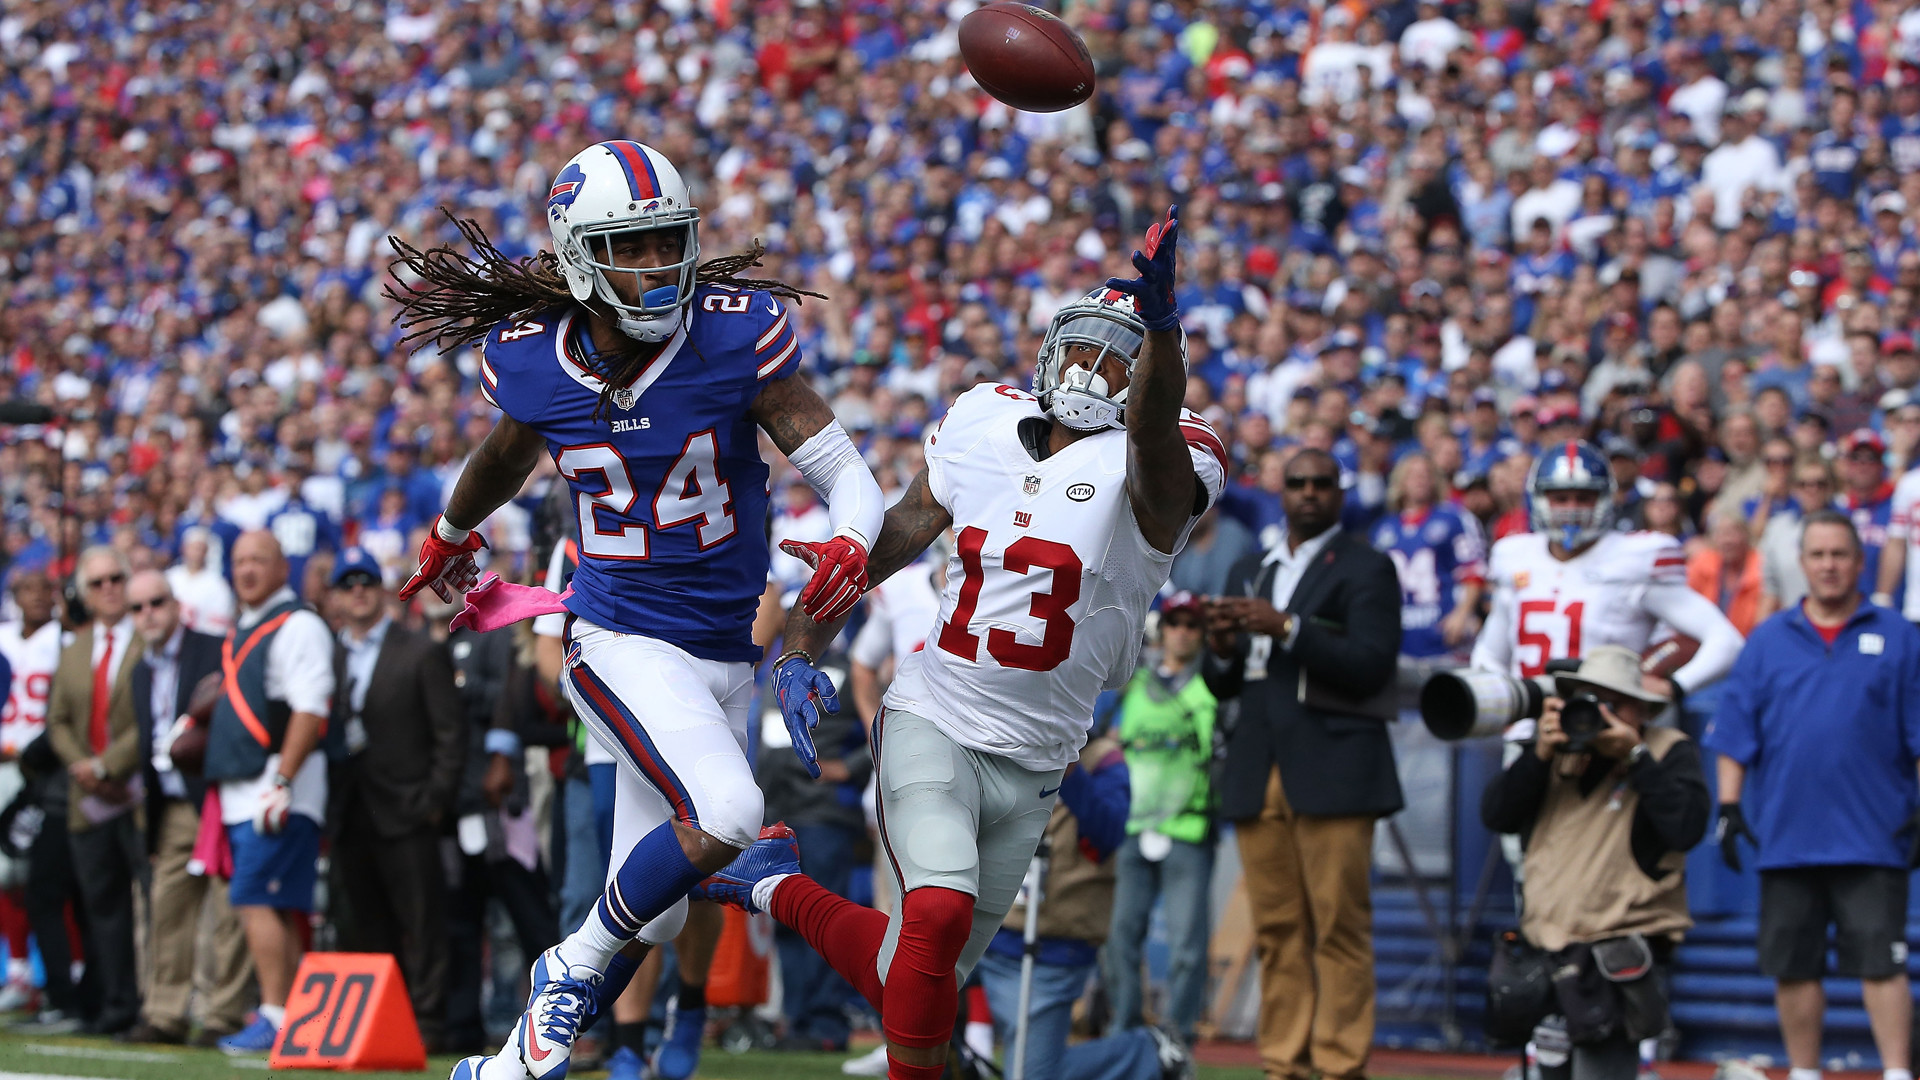 Odell Beckham Jr. nearly repeated The Catch against the Buffalo Bills, but